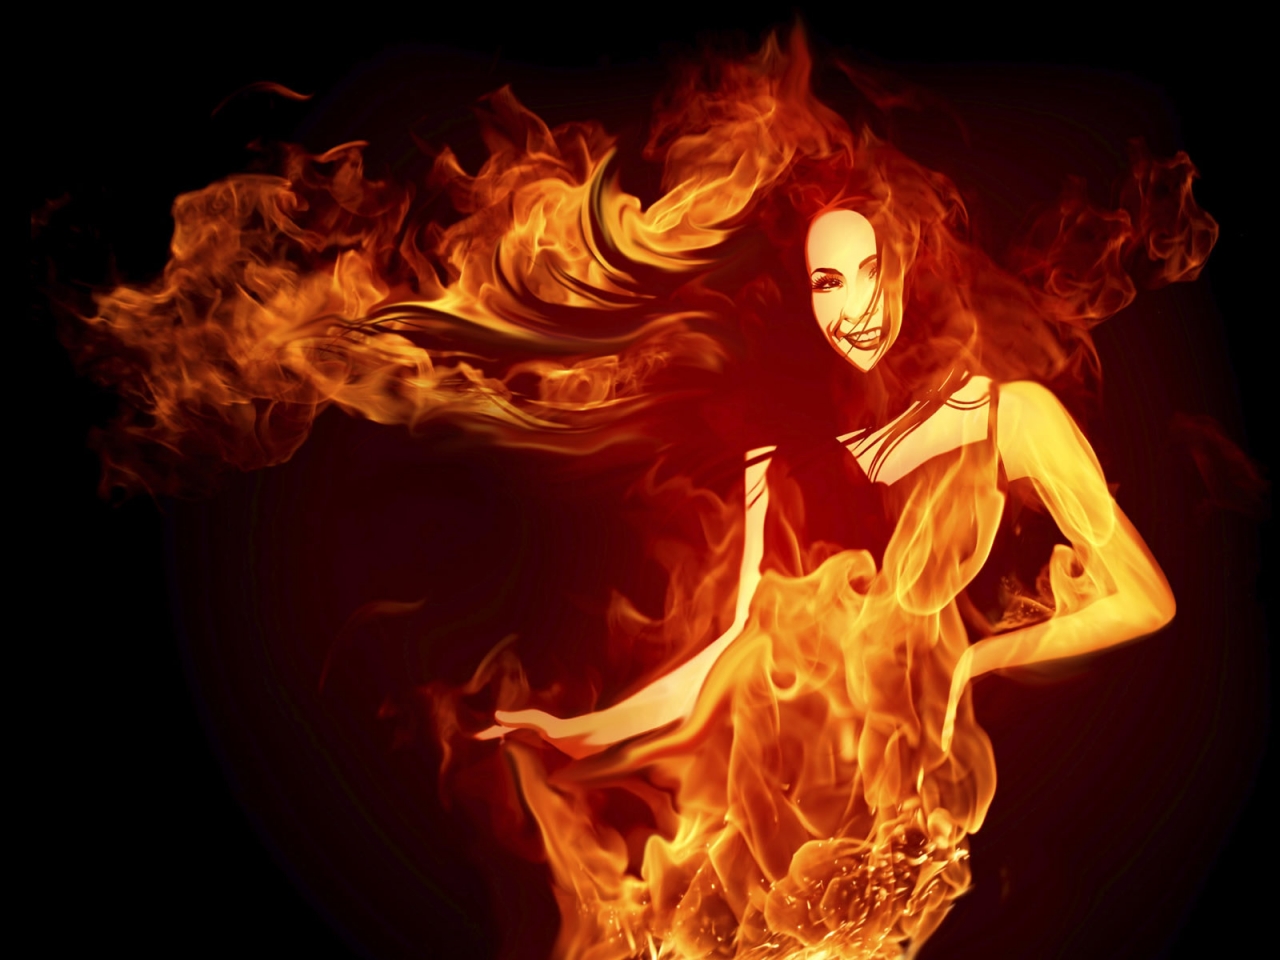 Woman in Fire for 1280 x 960 resolution